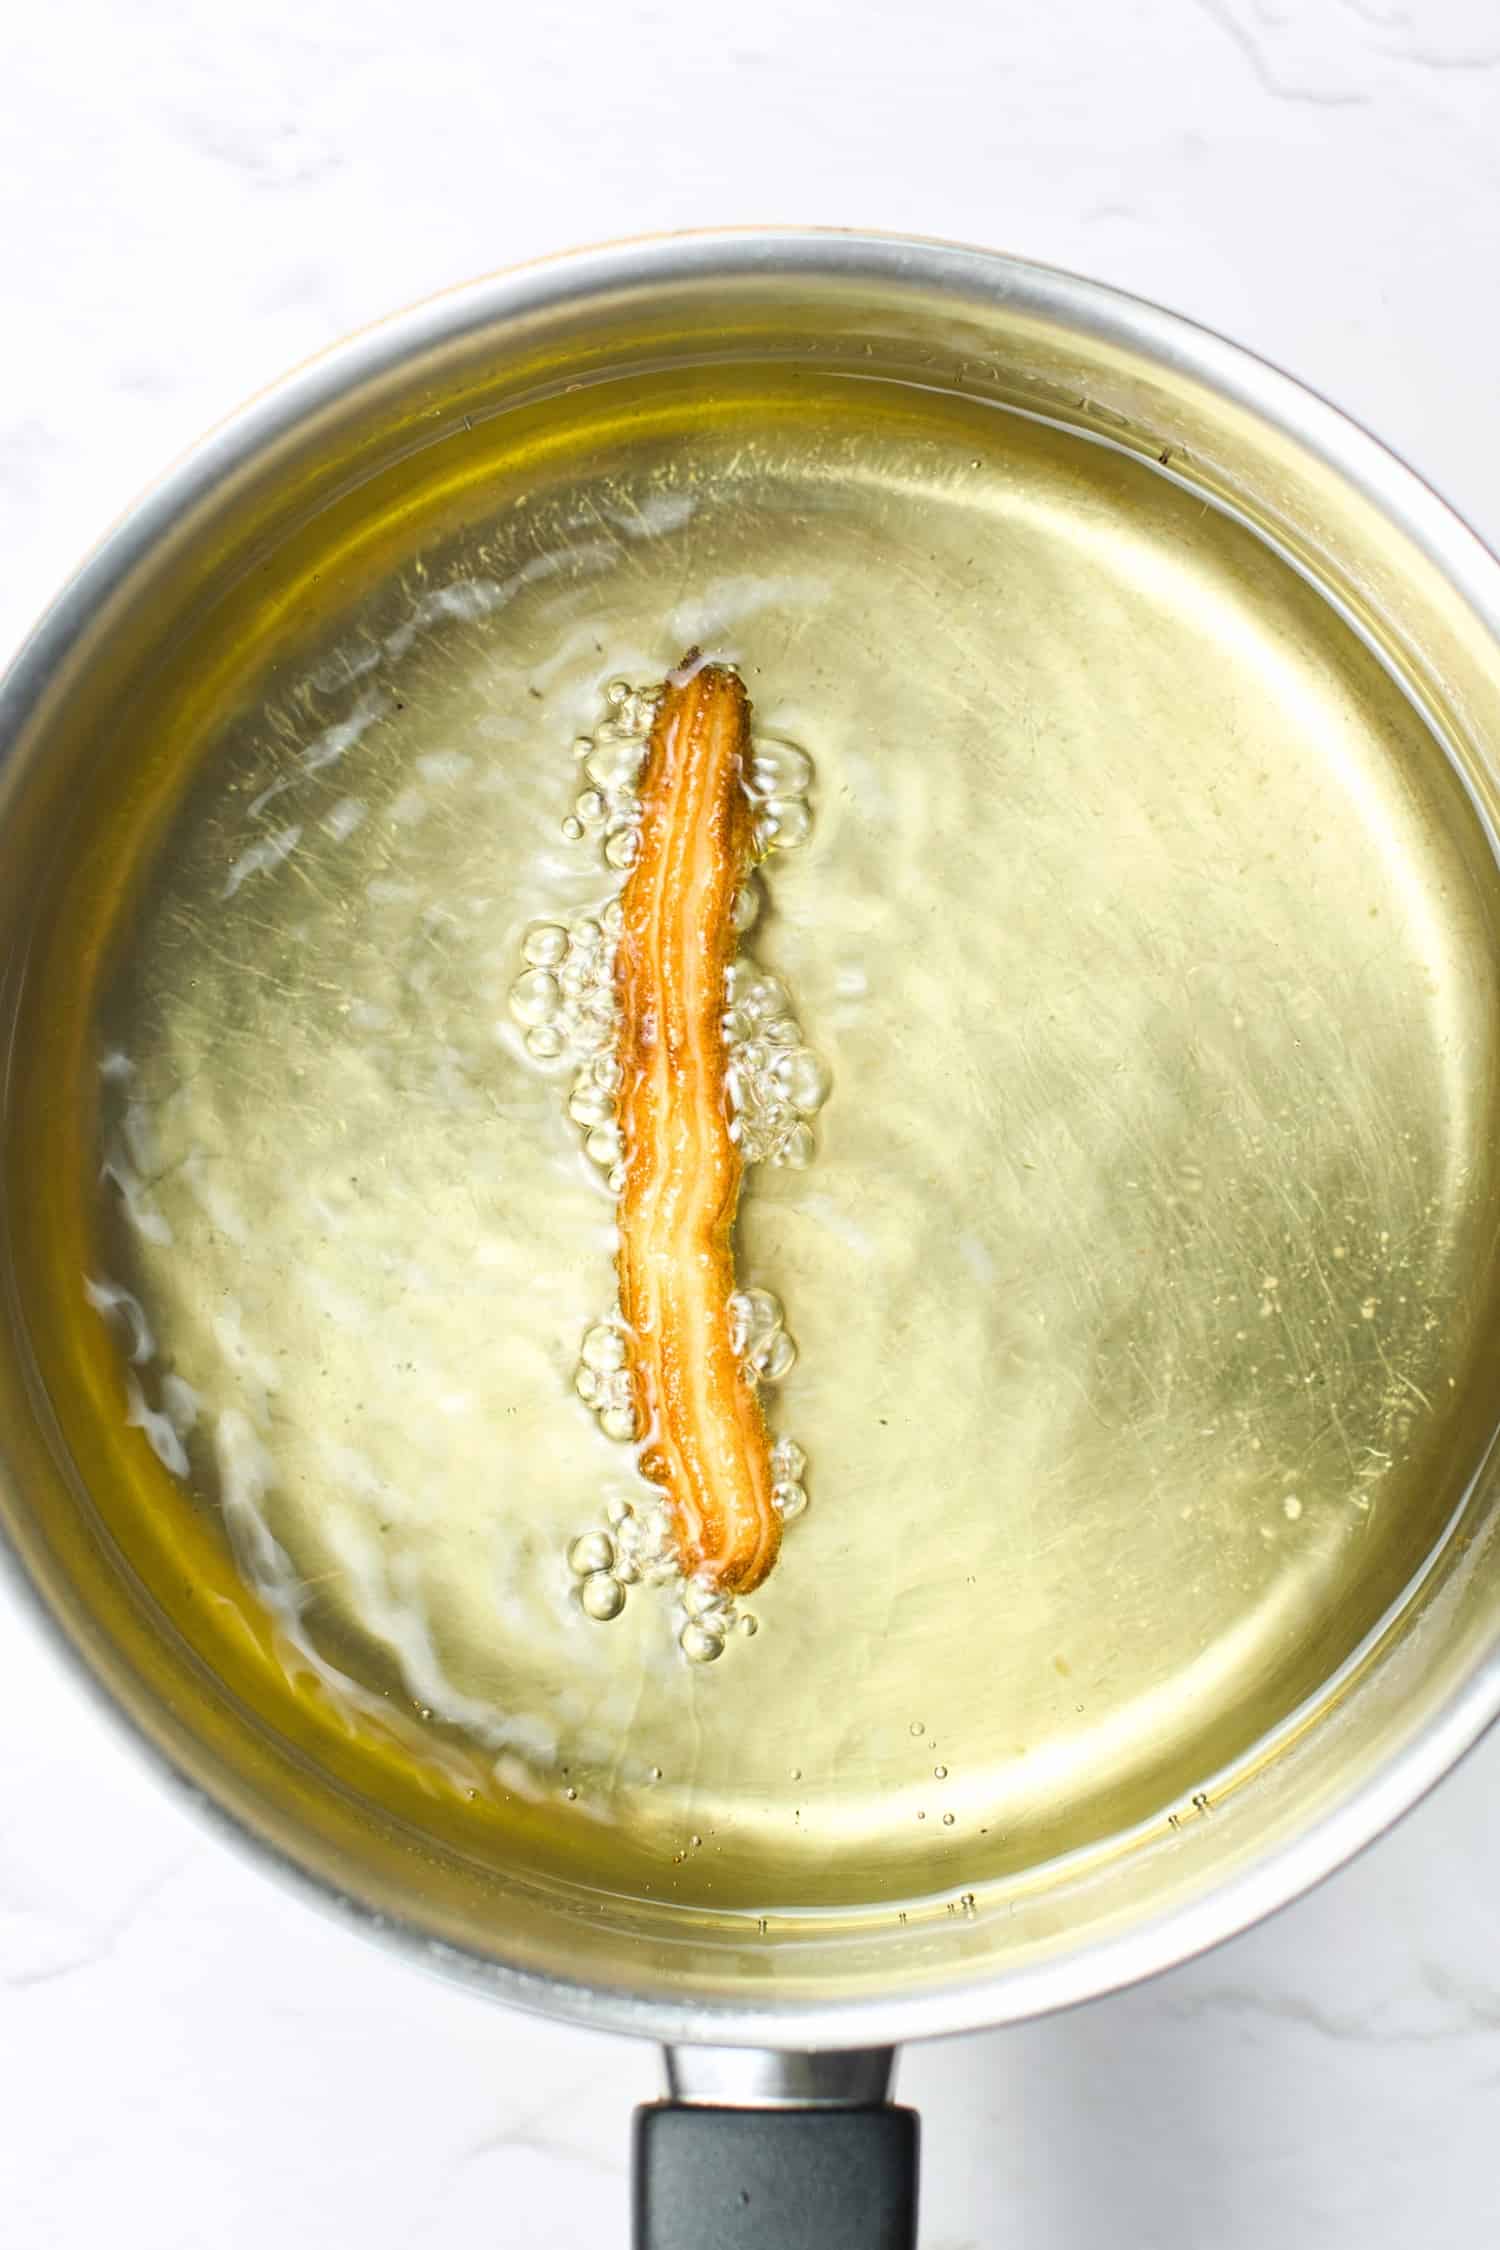 Golden brown churro cooking in hot oil.